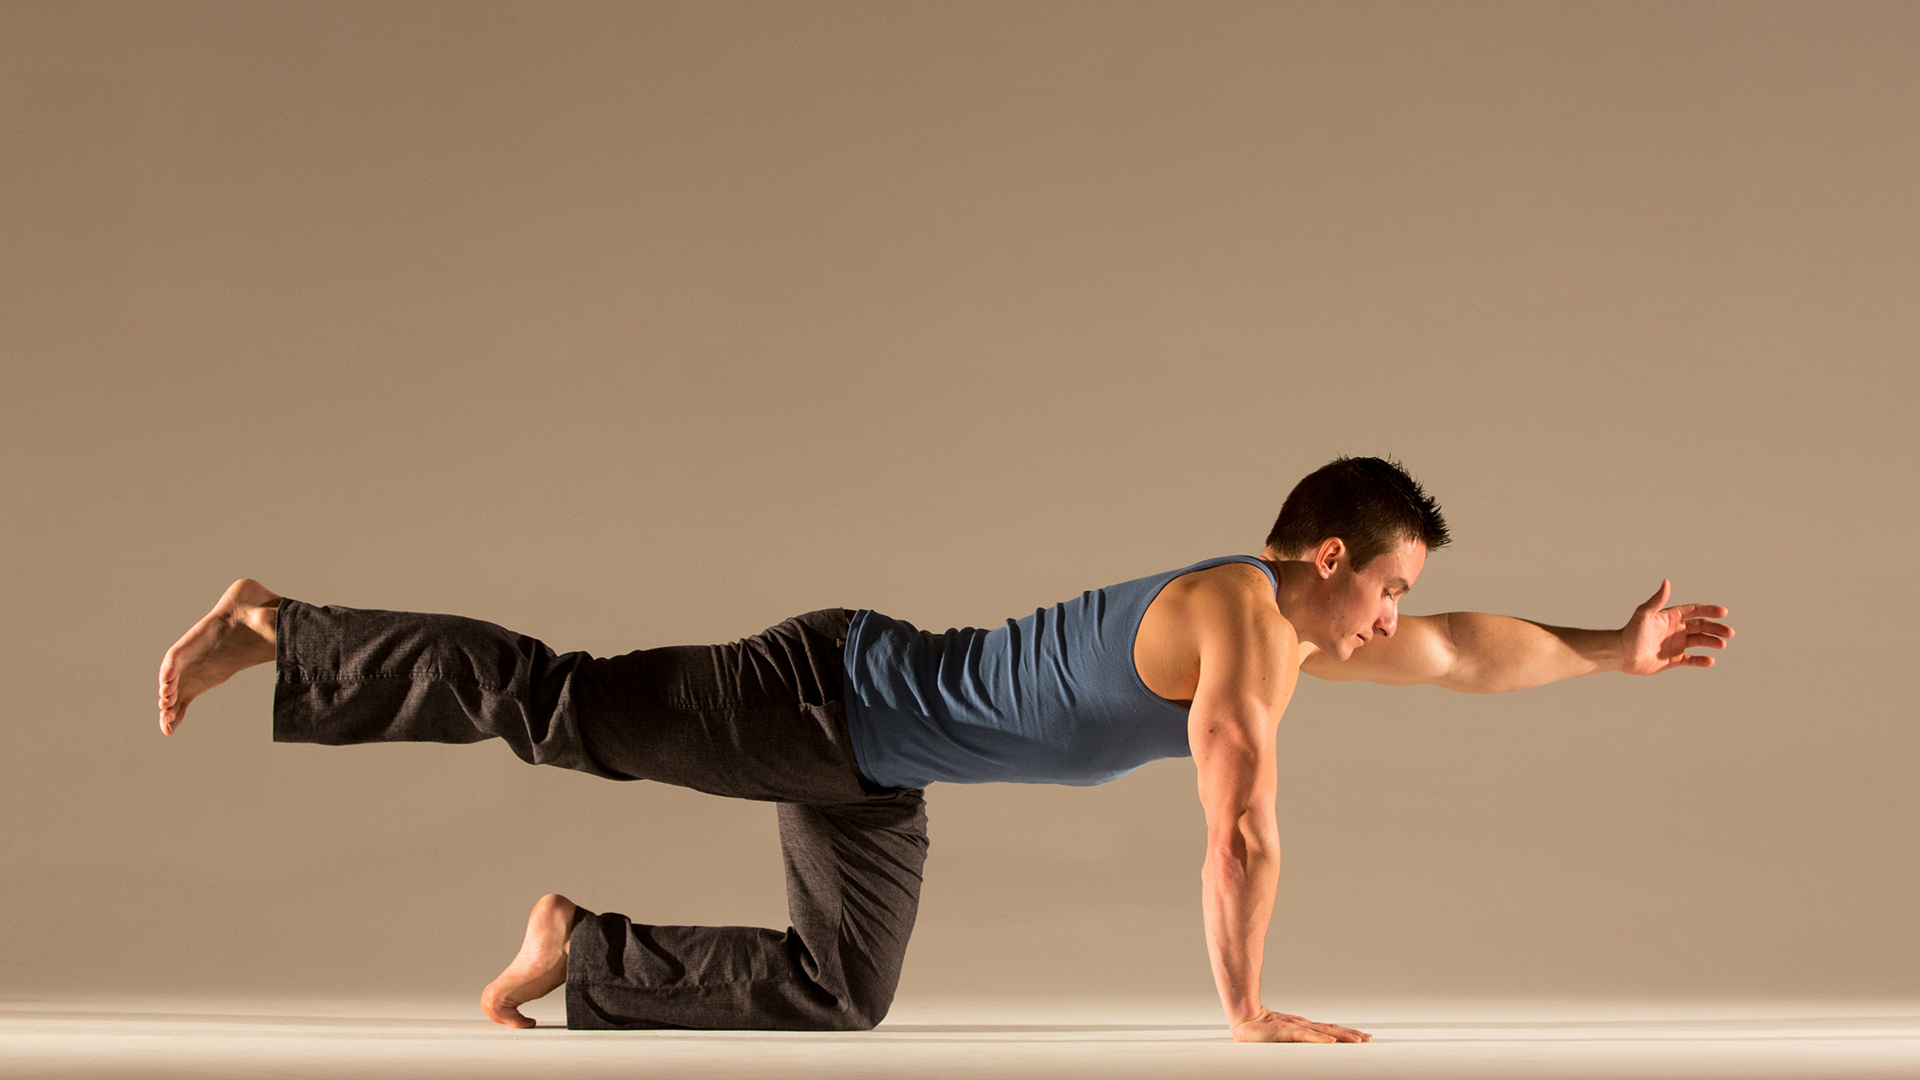 Details more than 81 bodybuilding yoga poses latest